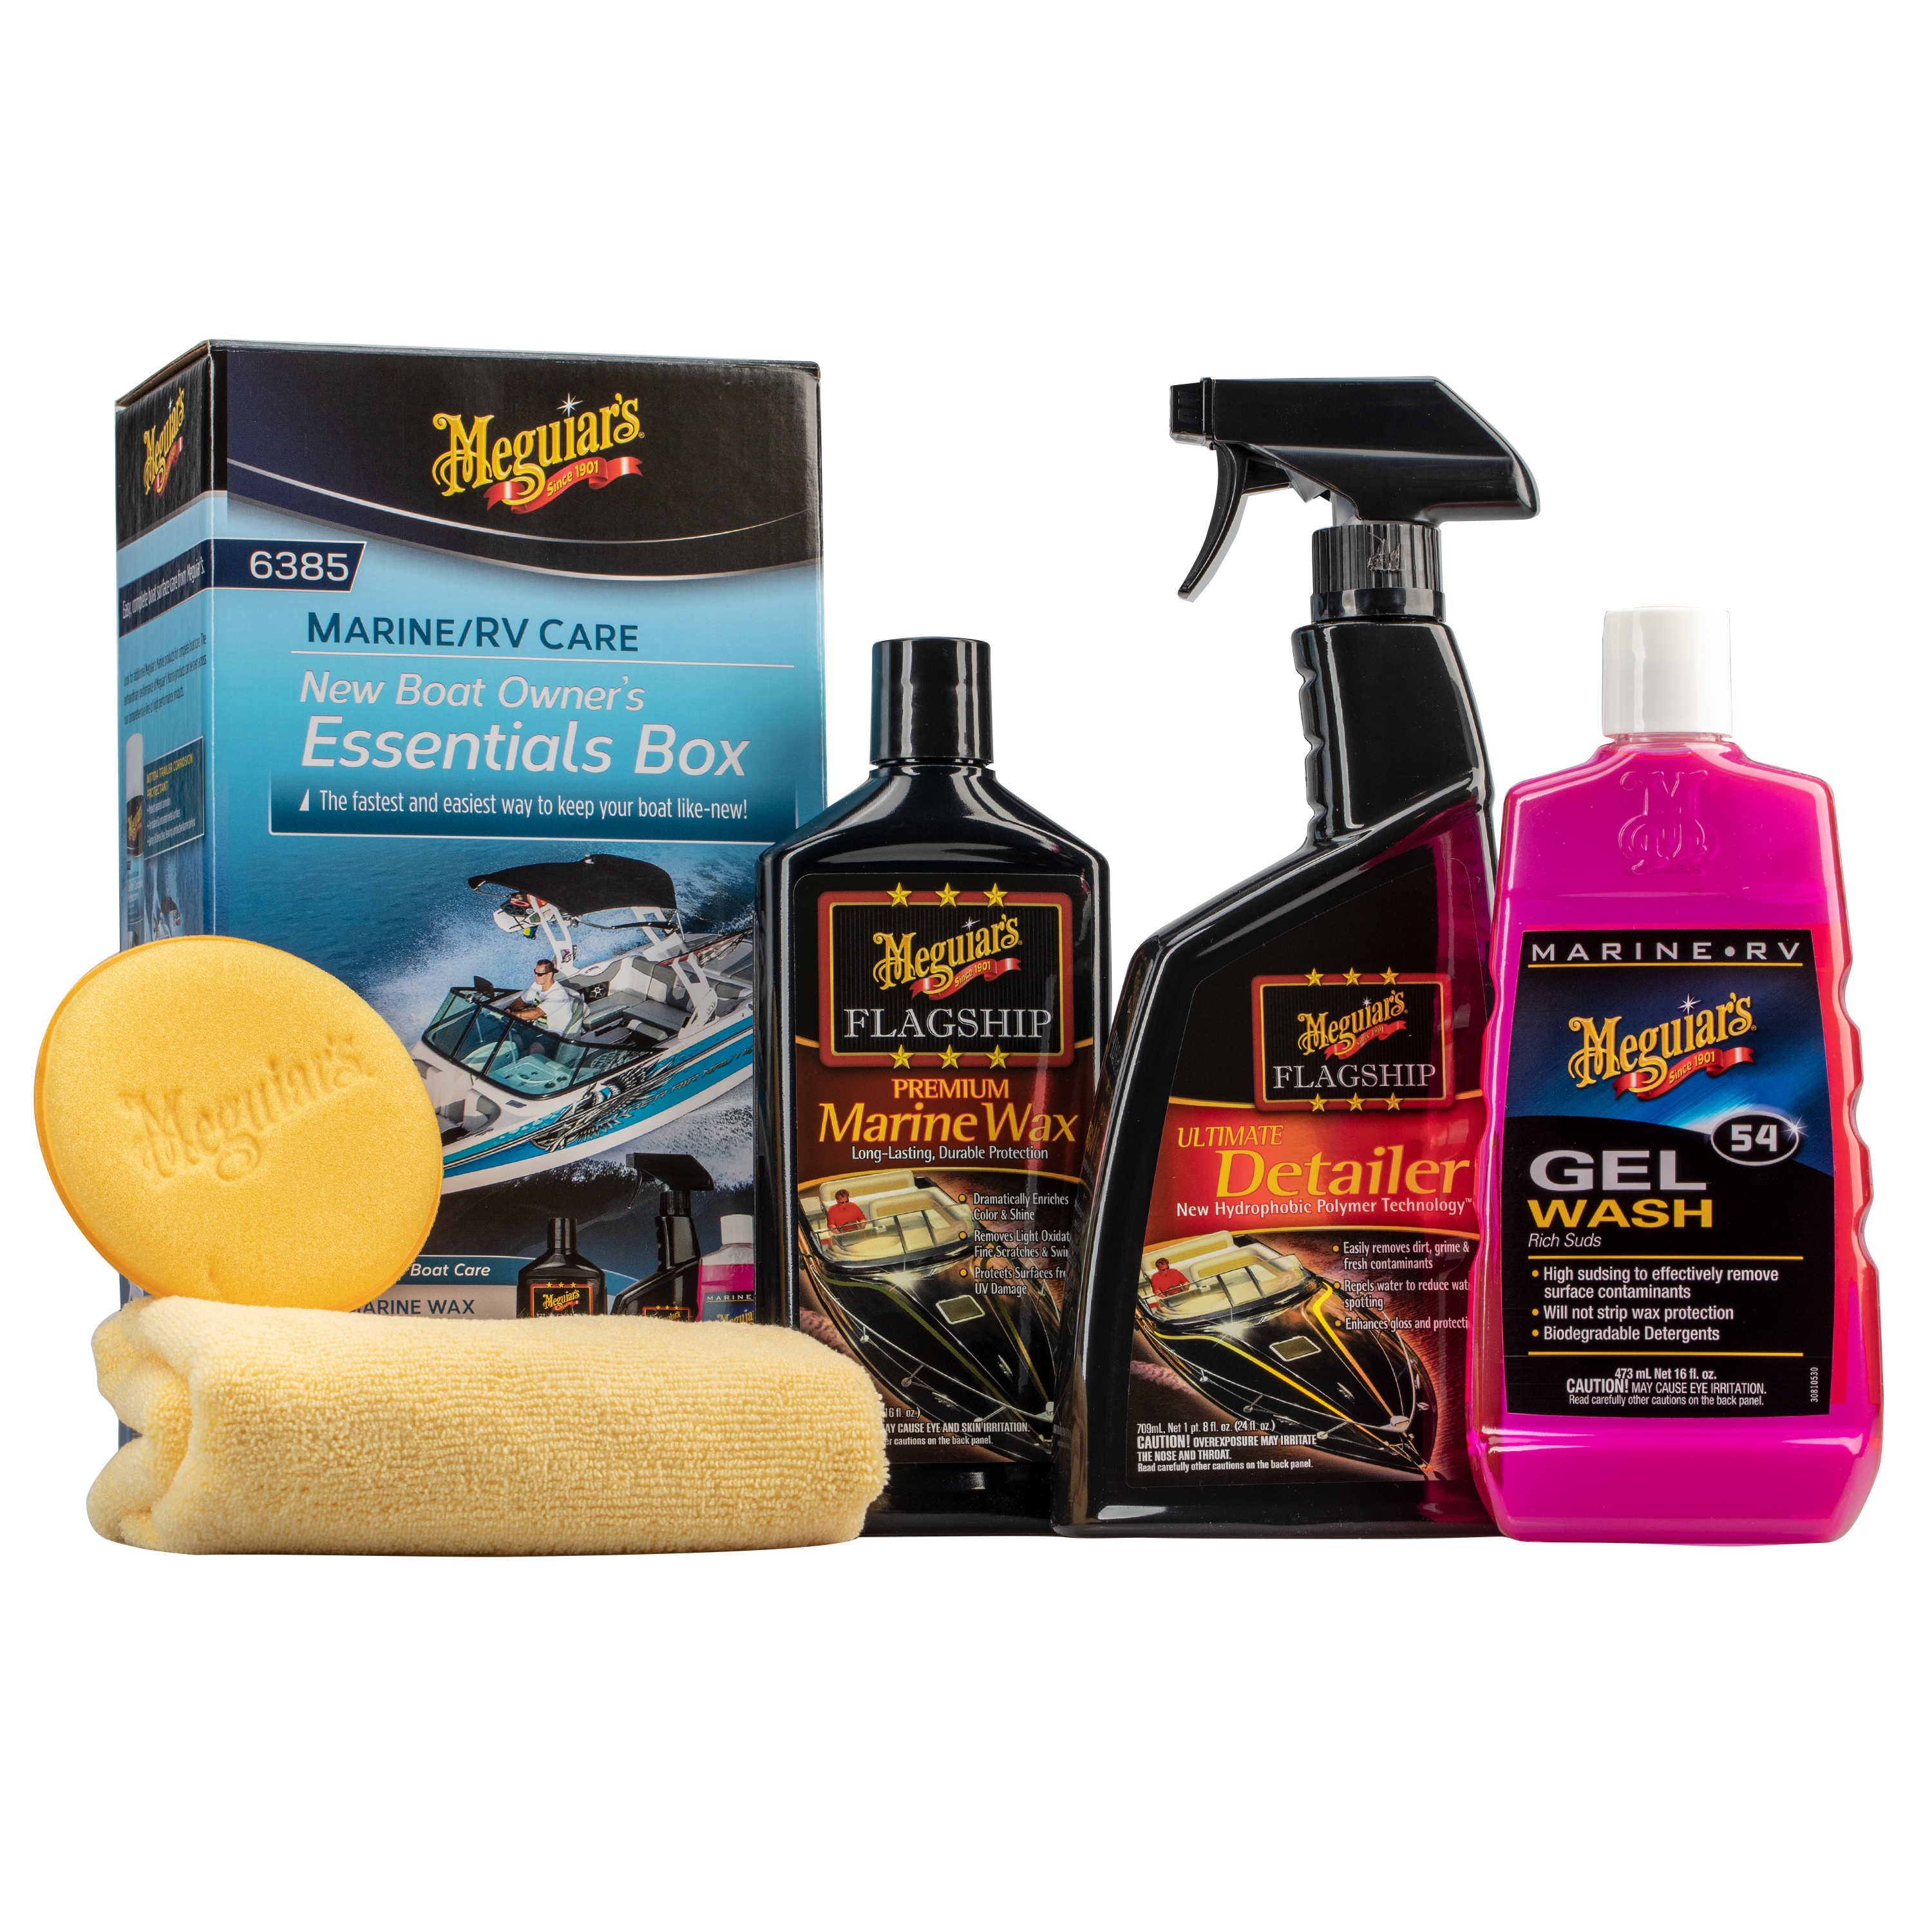 Meguiar’s M6385 Marine/RV Care New Boat Owner’s Essentials Box Kit, 1 Pack - image 3 of 9